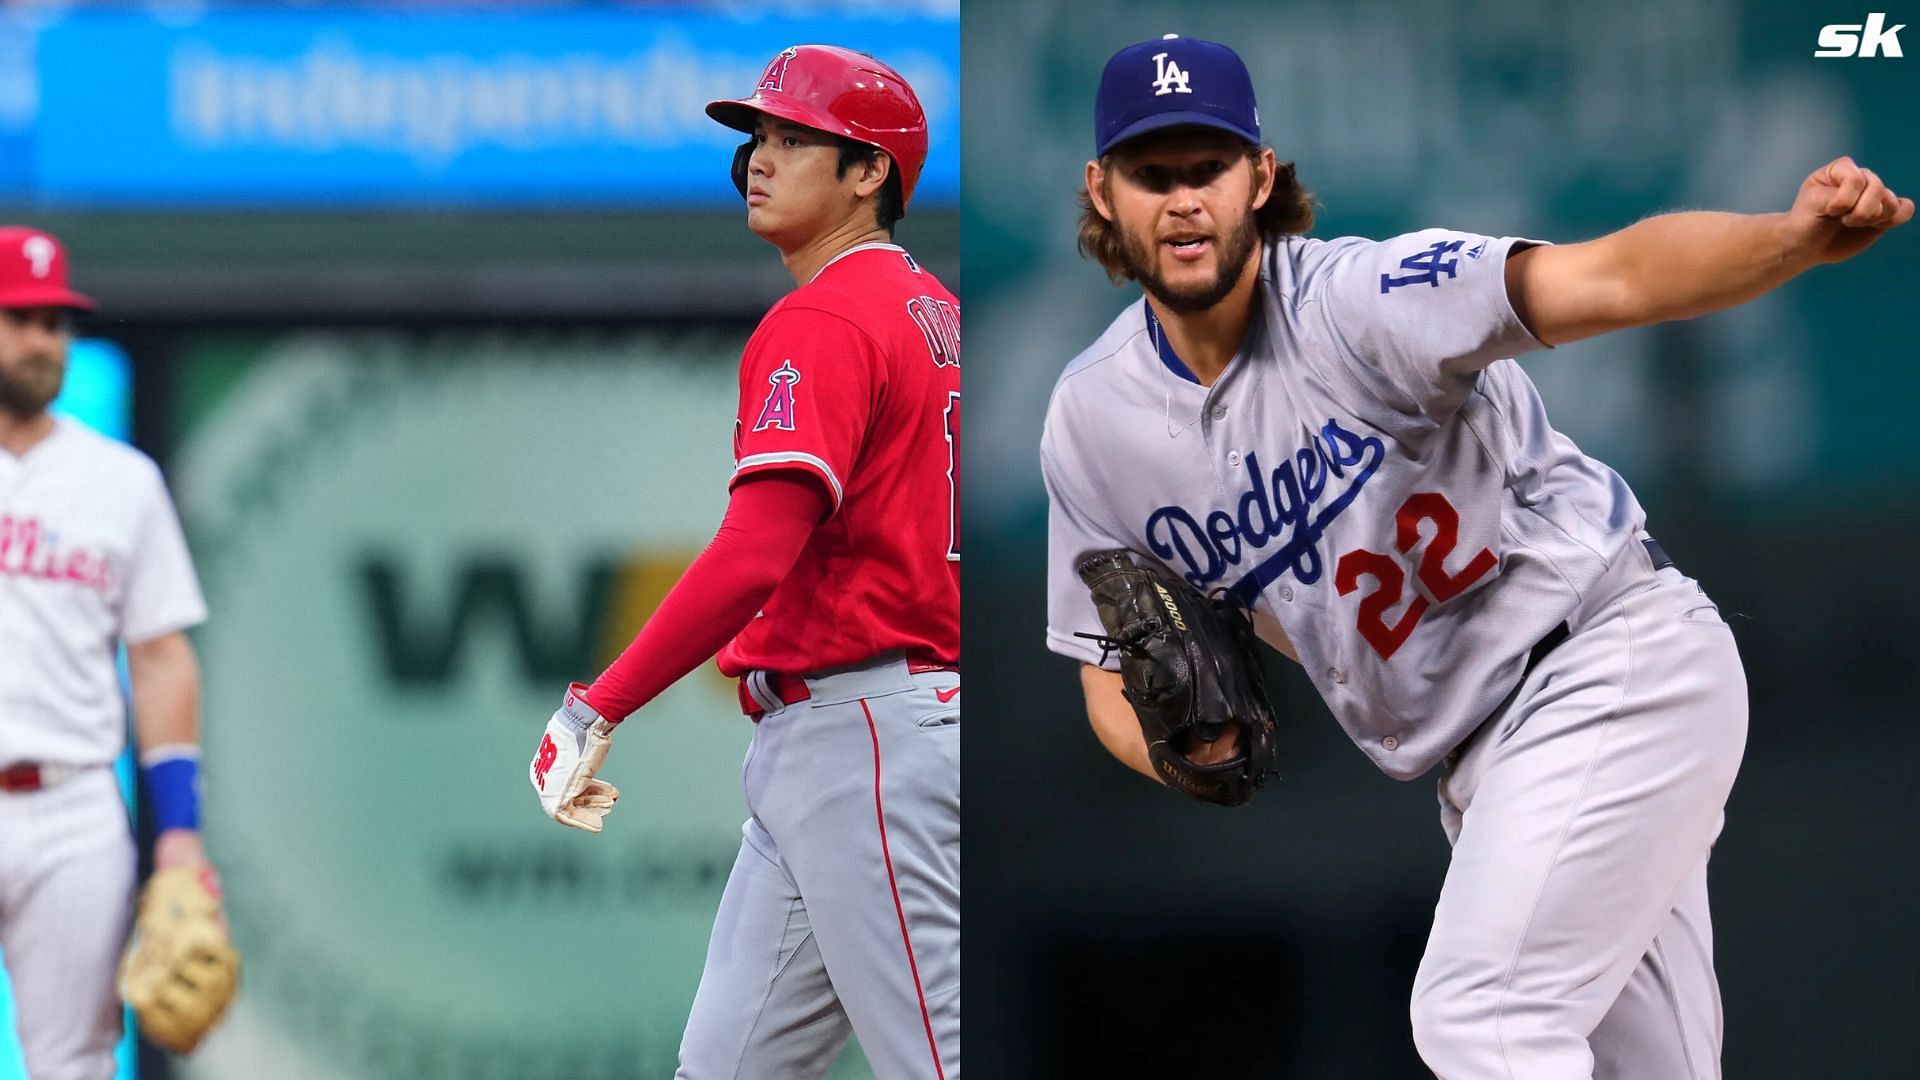 Shohei Ohtani enjoys going up against Clayton Kershaw and Bryce Harper in the MLB